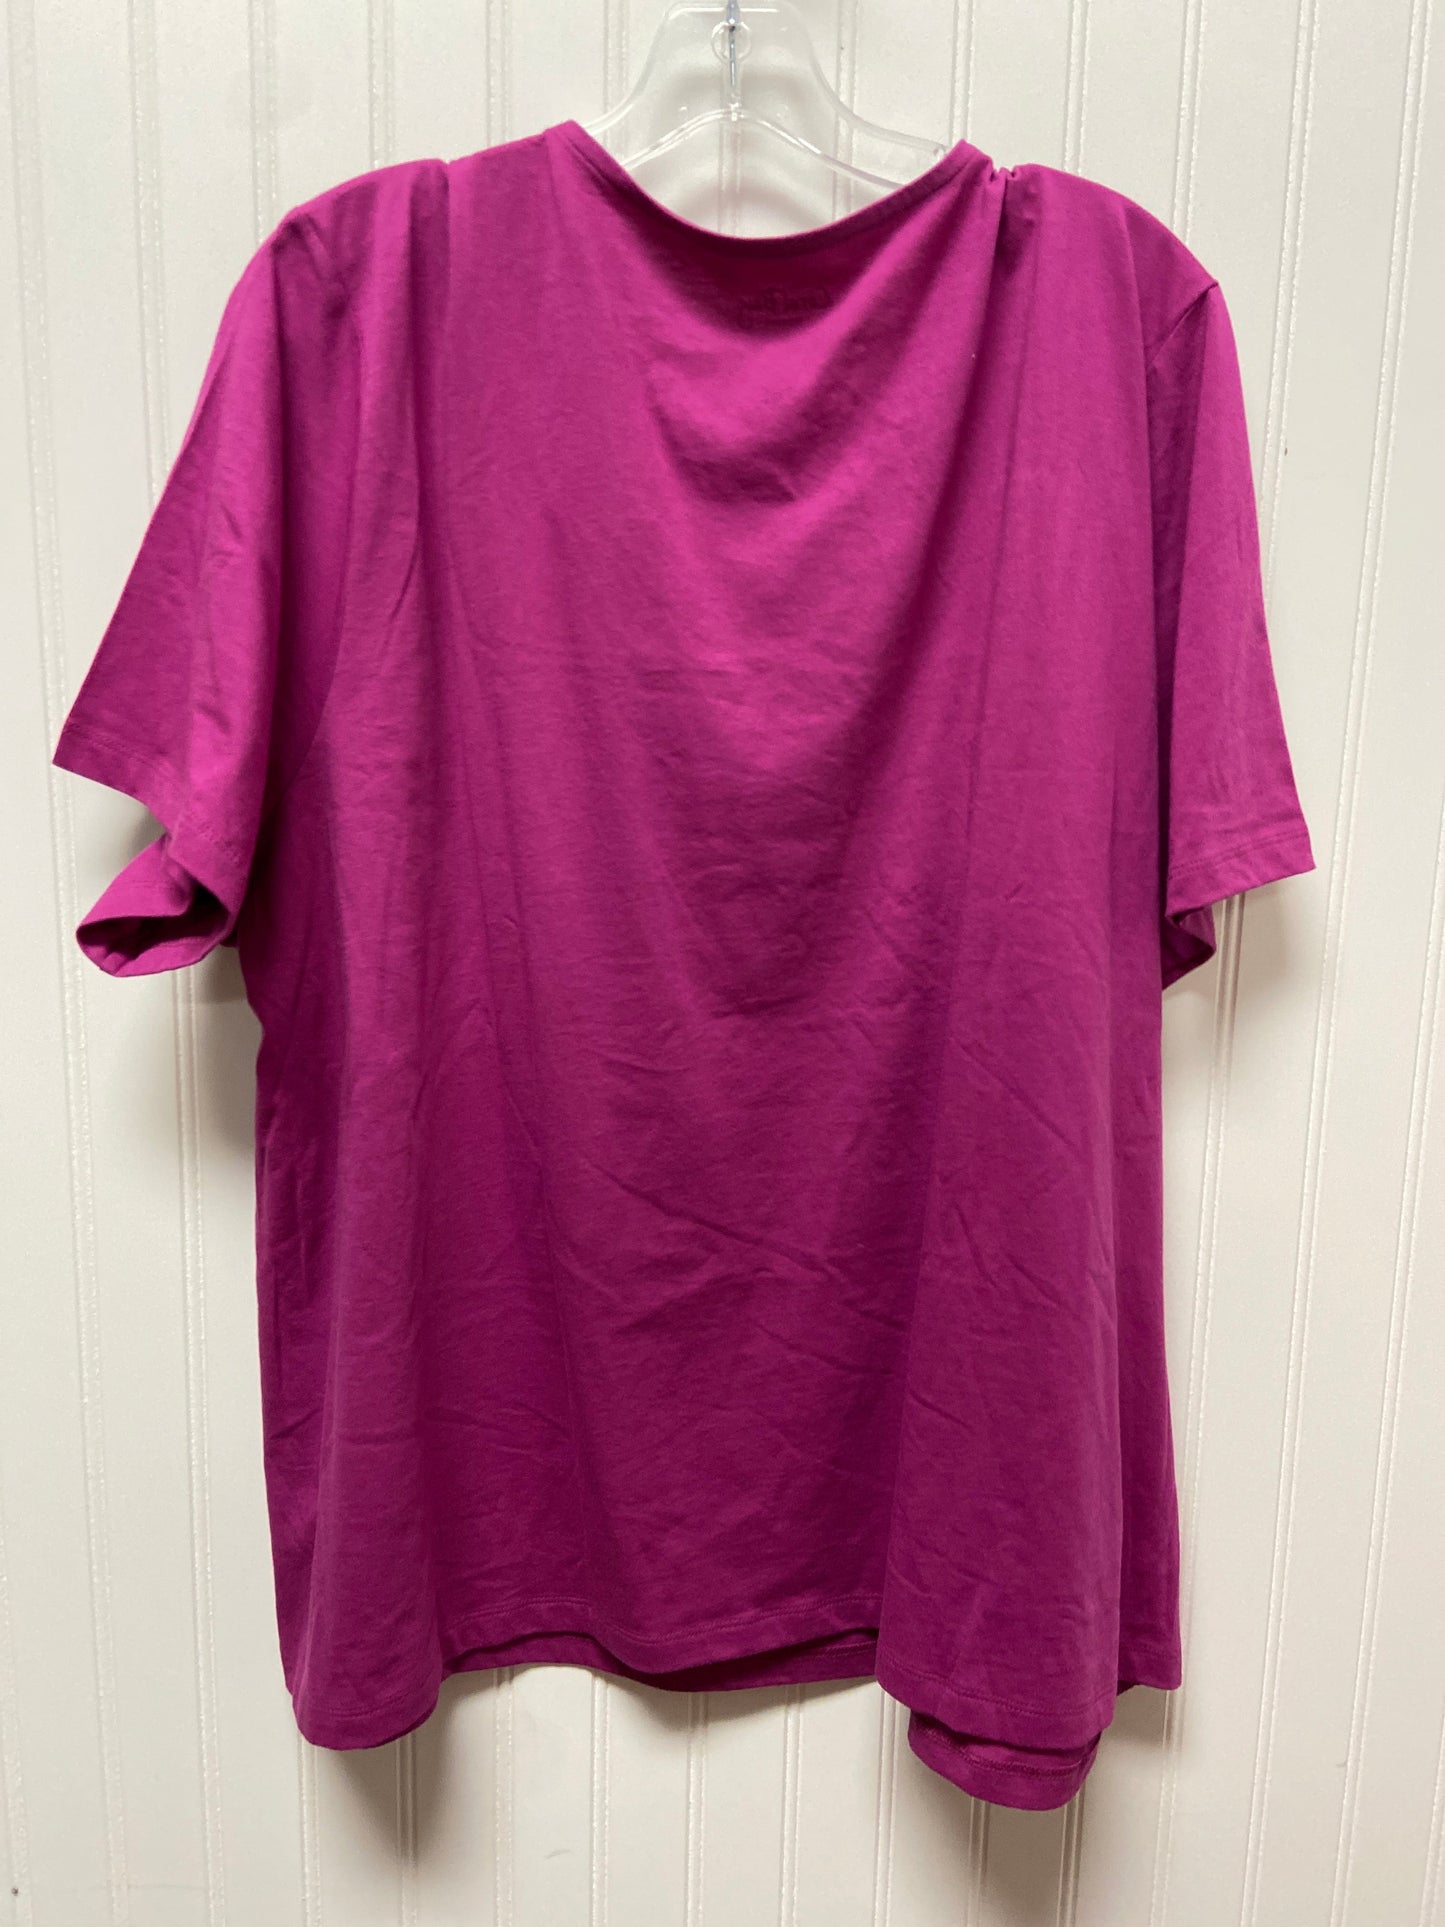 Purple Top Short Sleeve Coral Bay, Size 3x